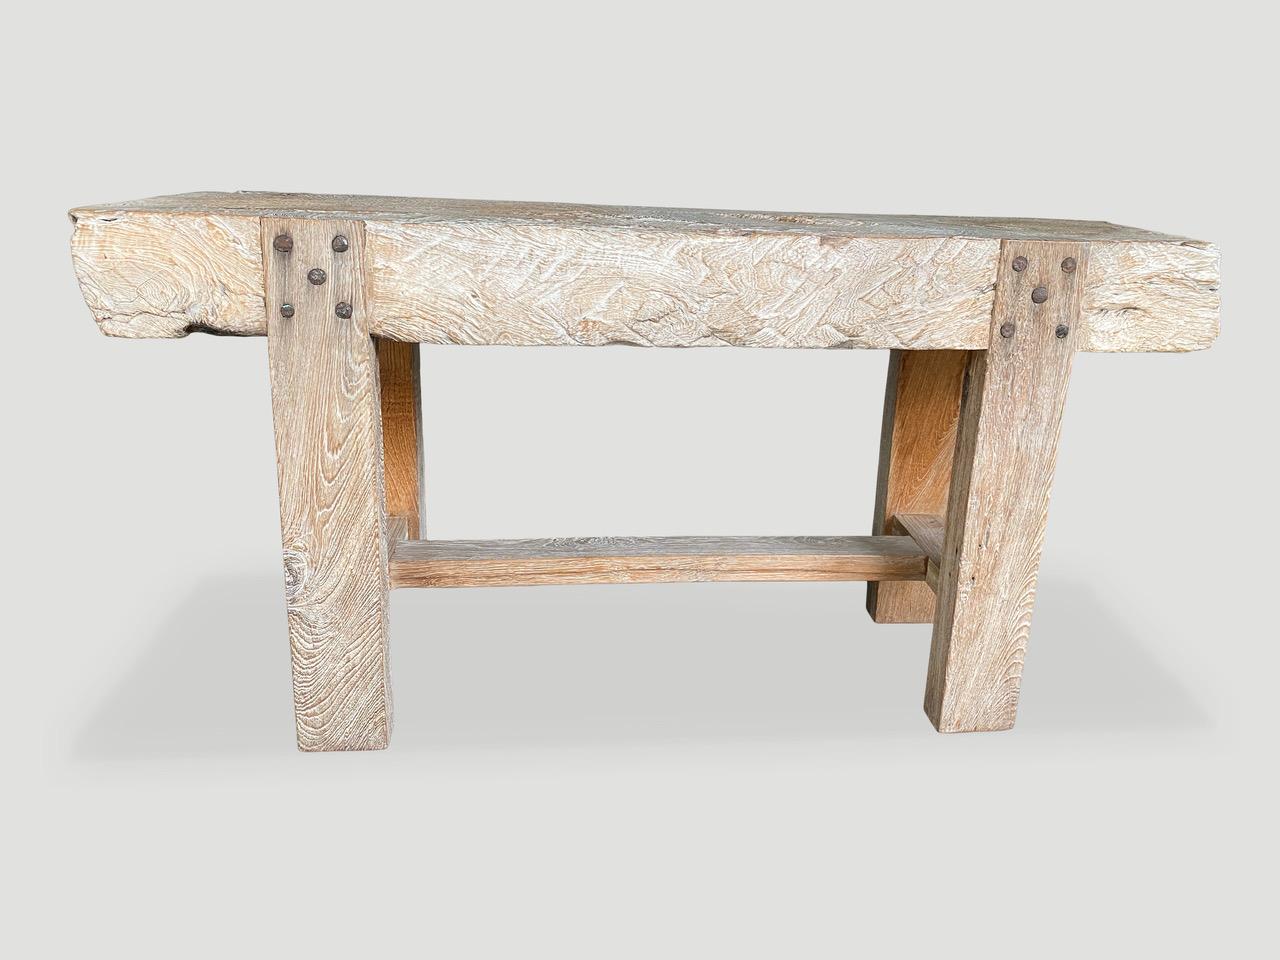 Andrianna Shamaris Impressive Teak Wood Log Style Console Table In Excellent Condition For Sale In New York, NY